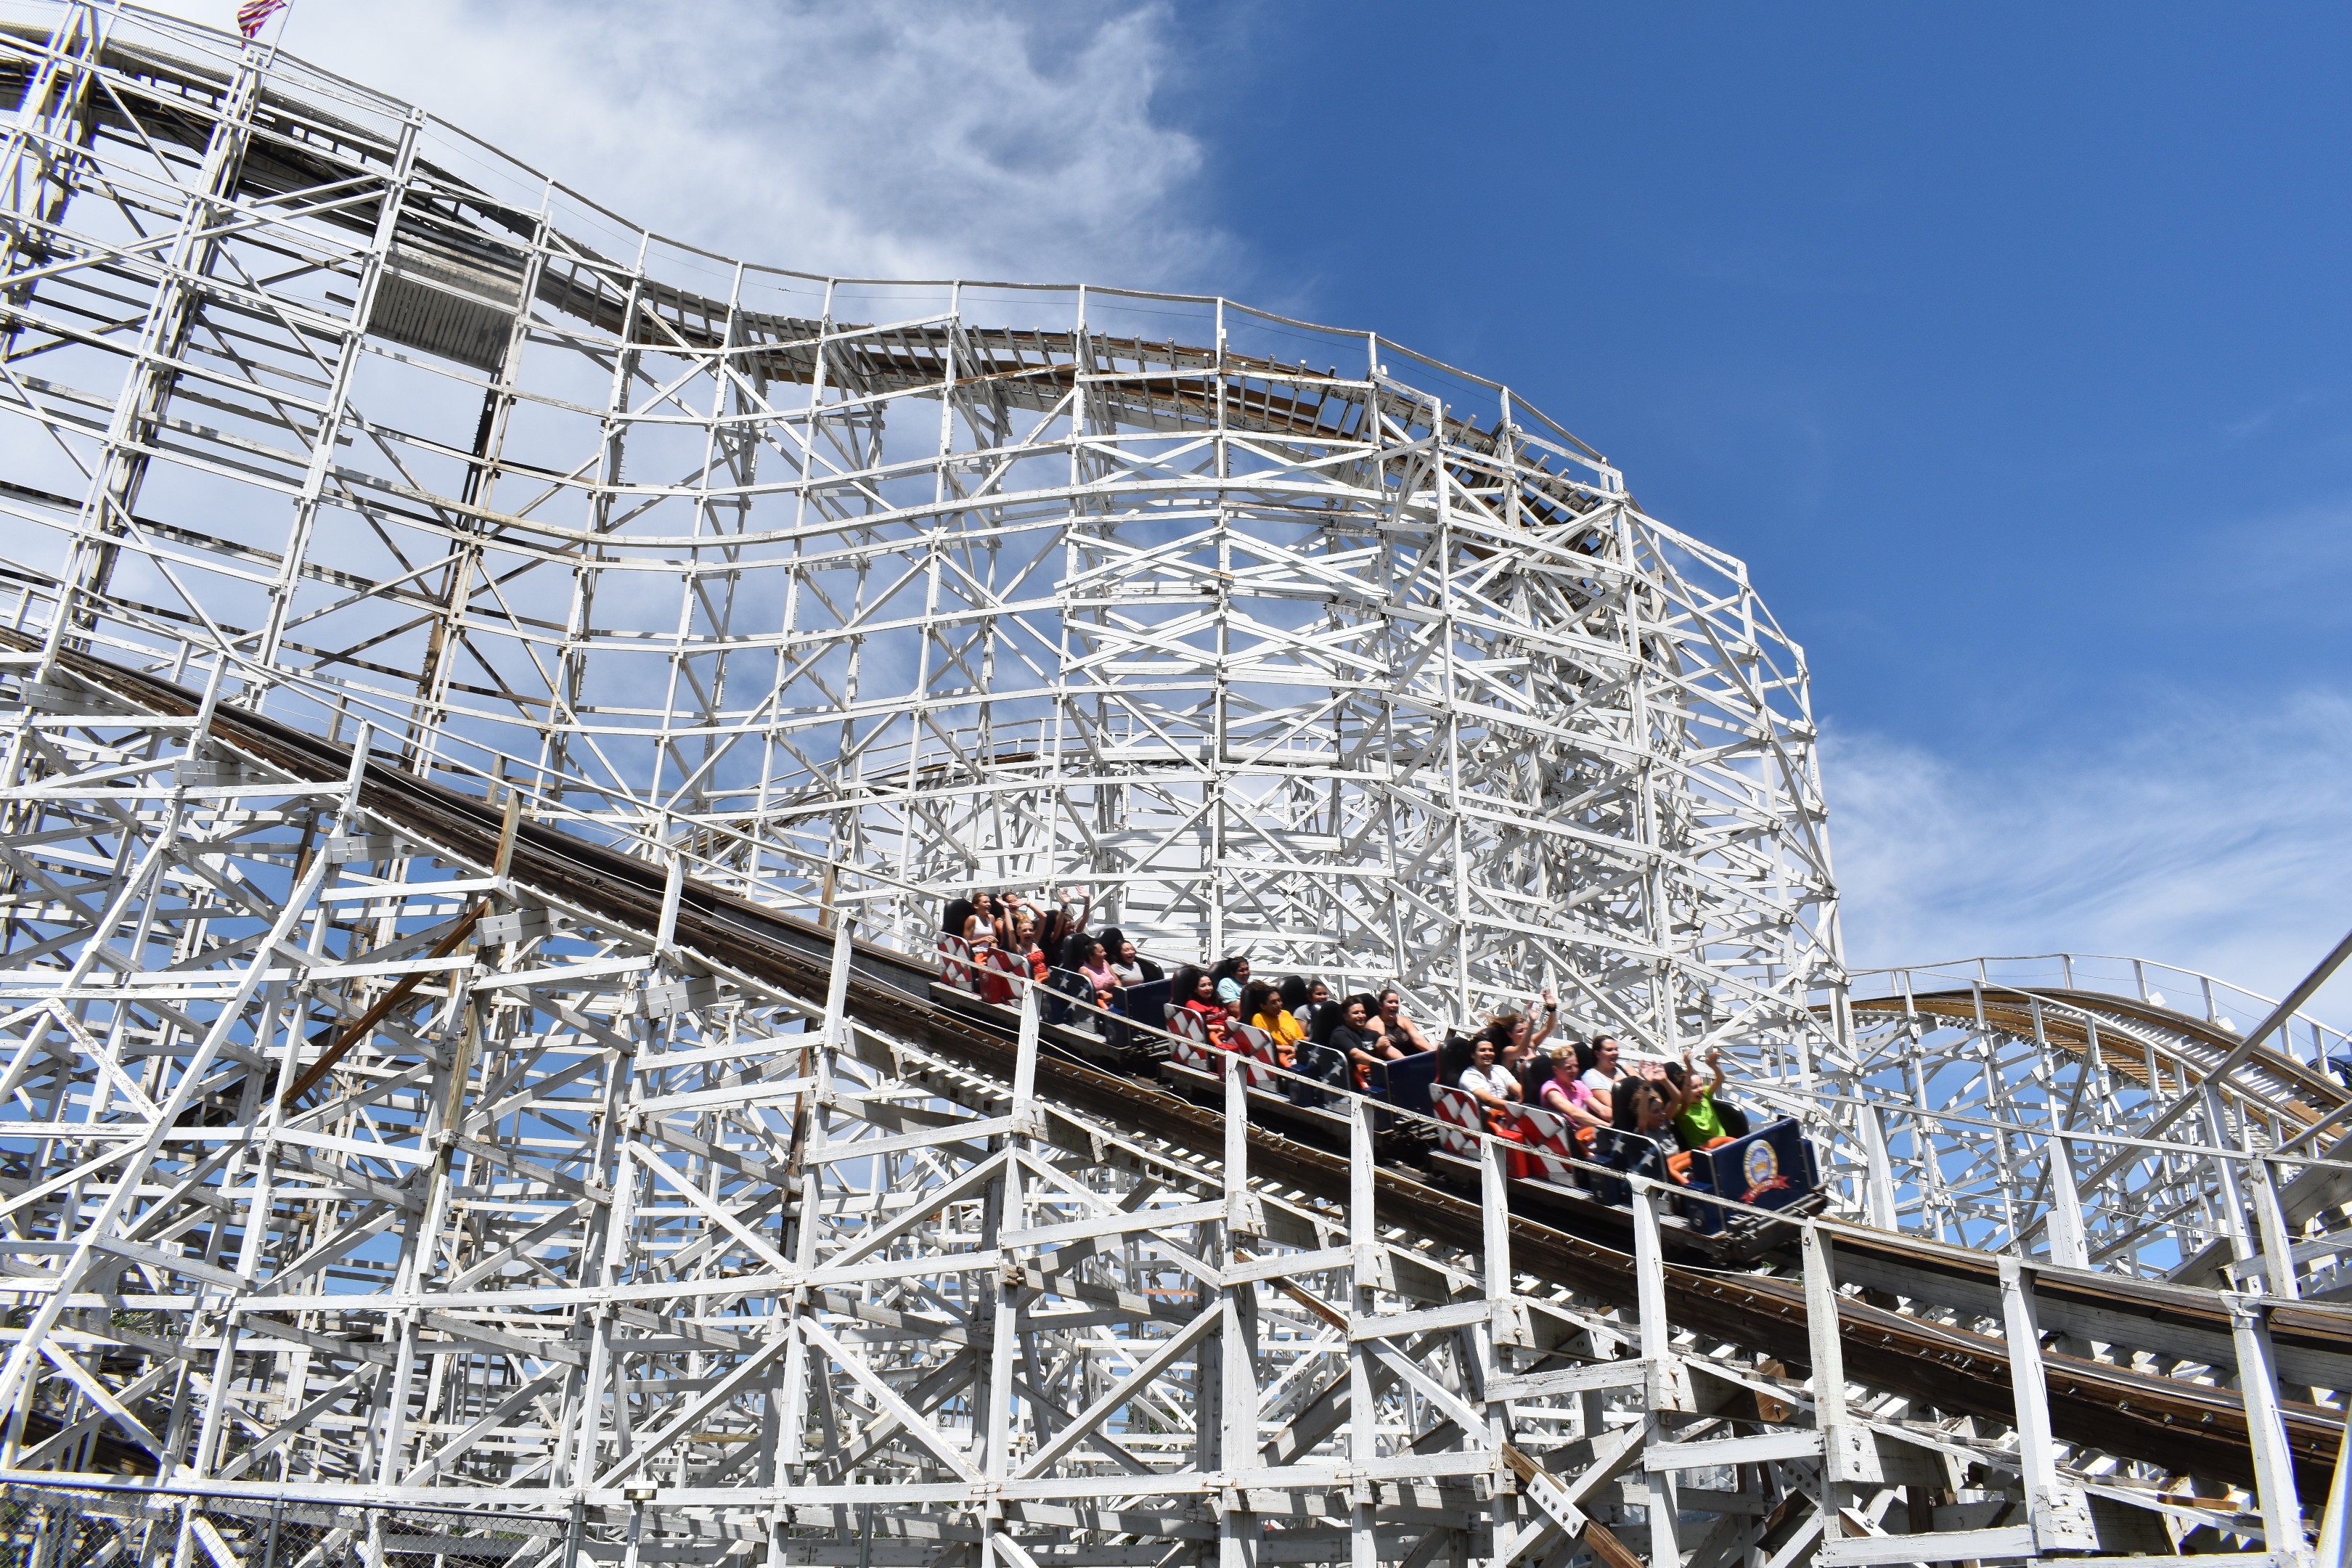 Reimagined wooden coaster Twister III opens at Elitch Gardens this summer